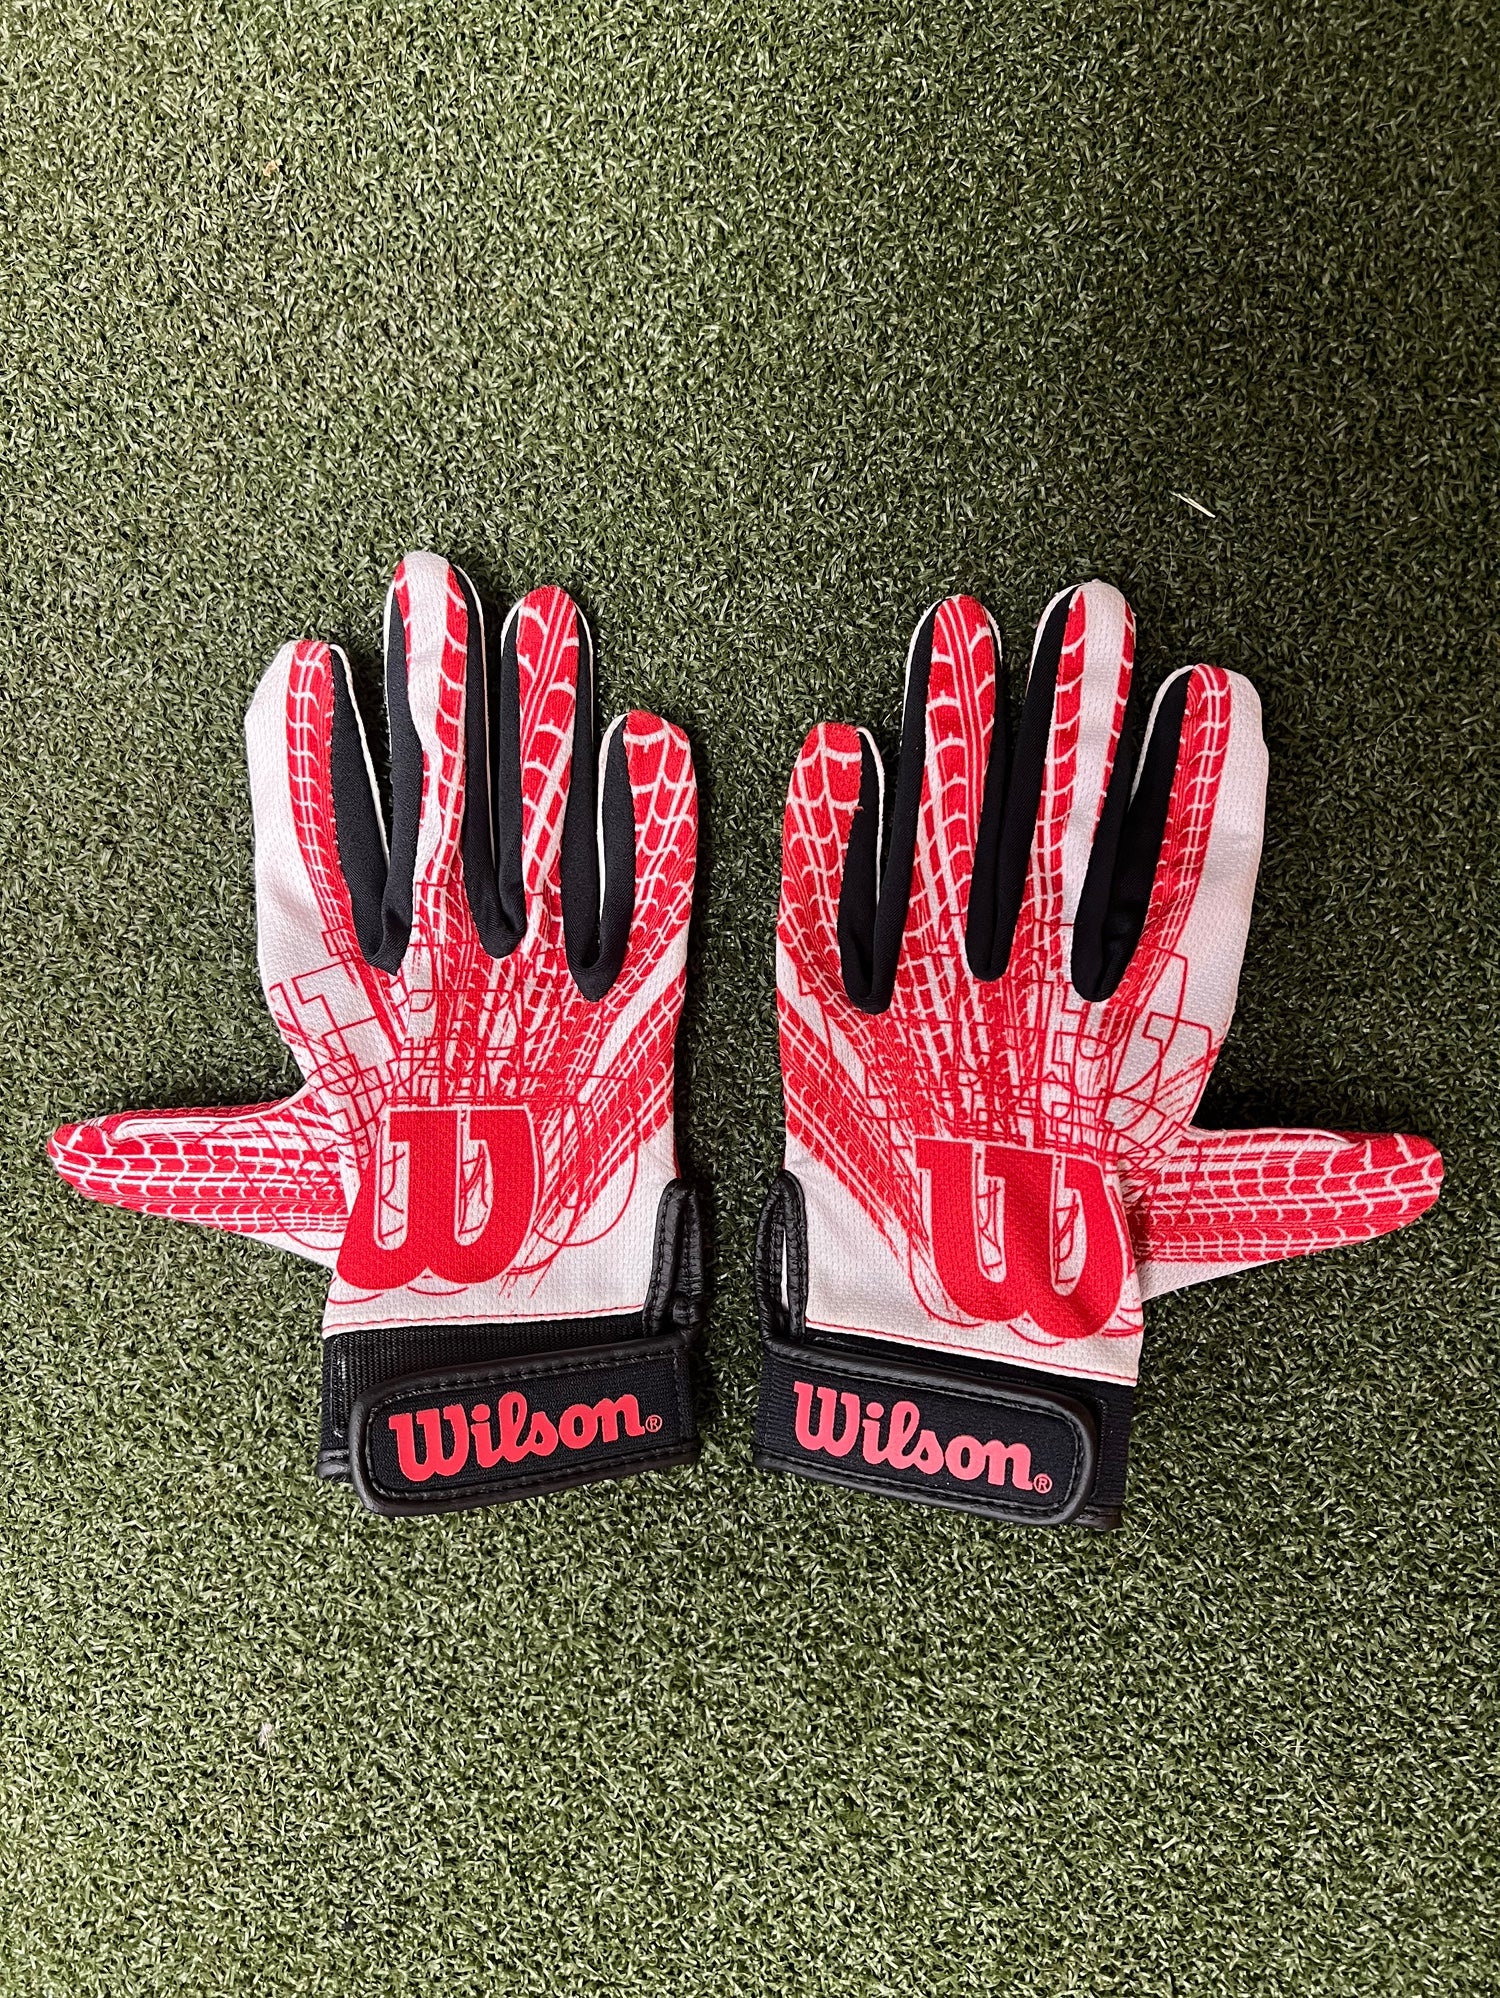 Wilson Skill Gloves rededuct.com